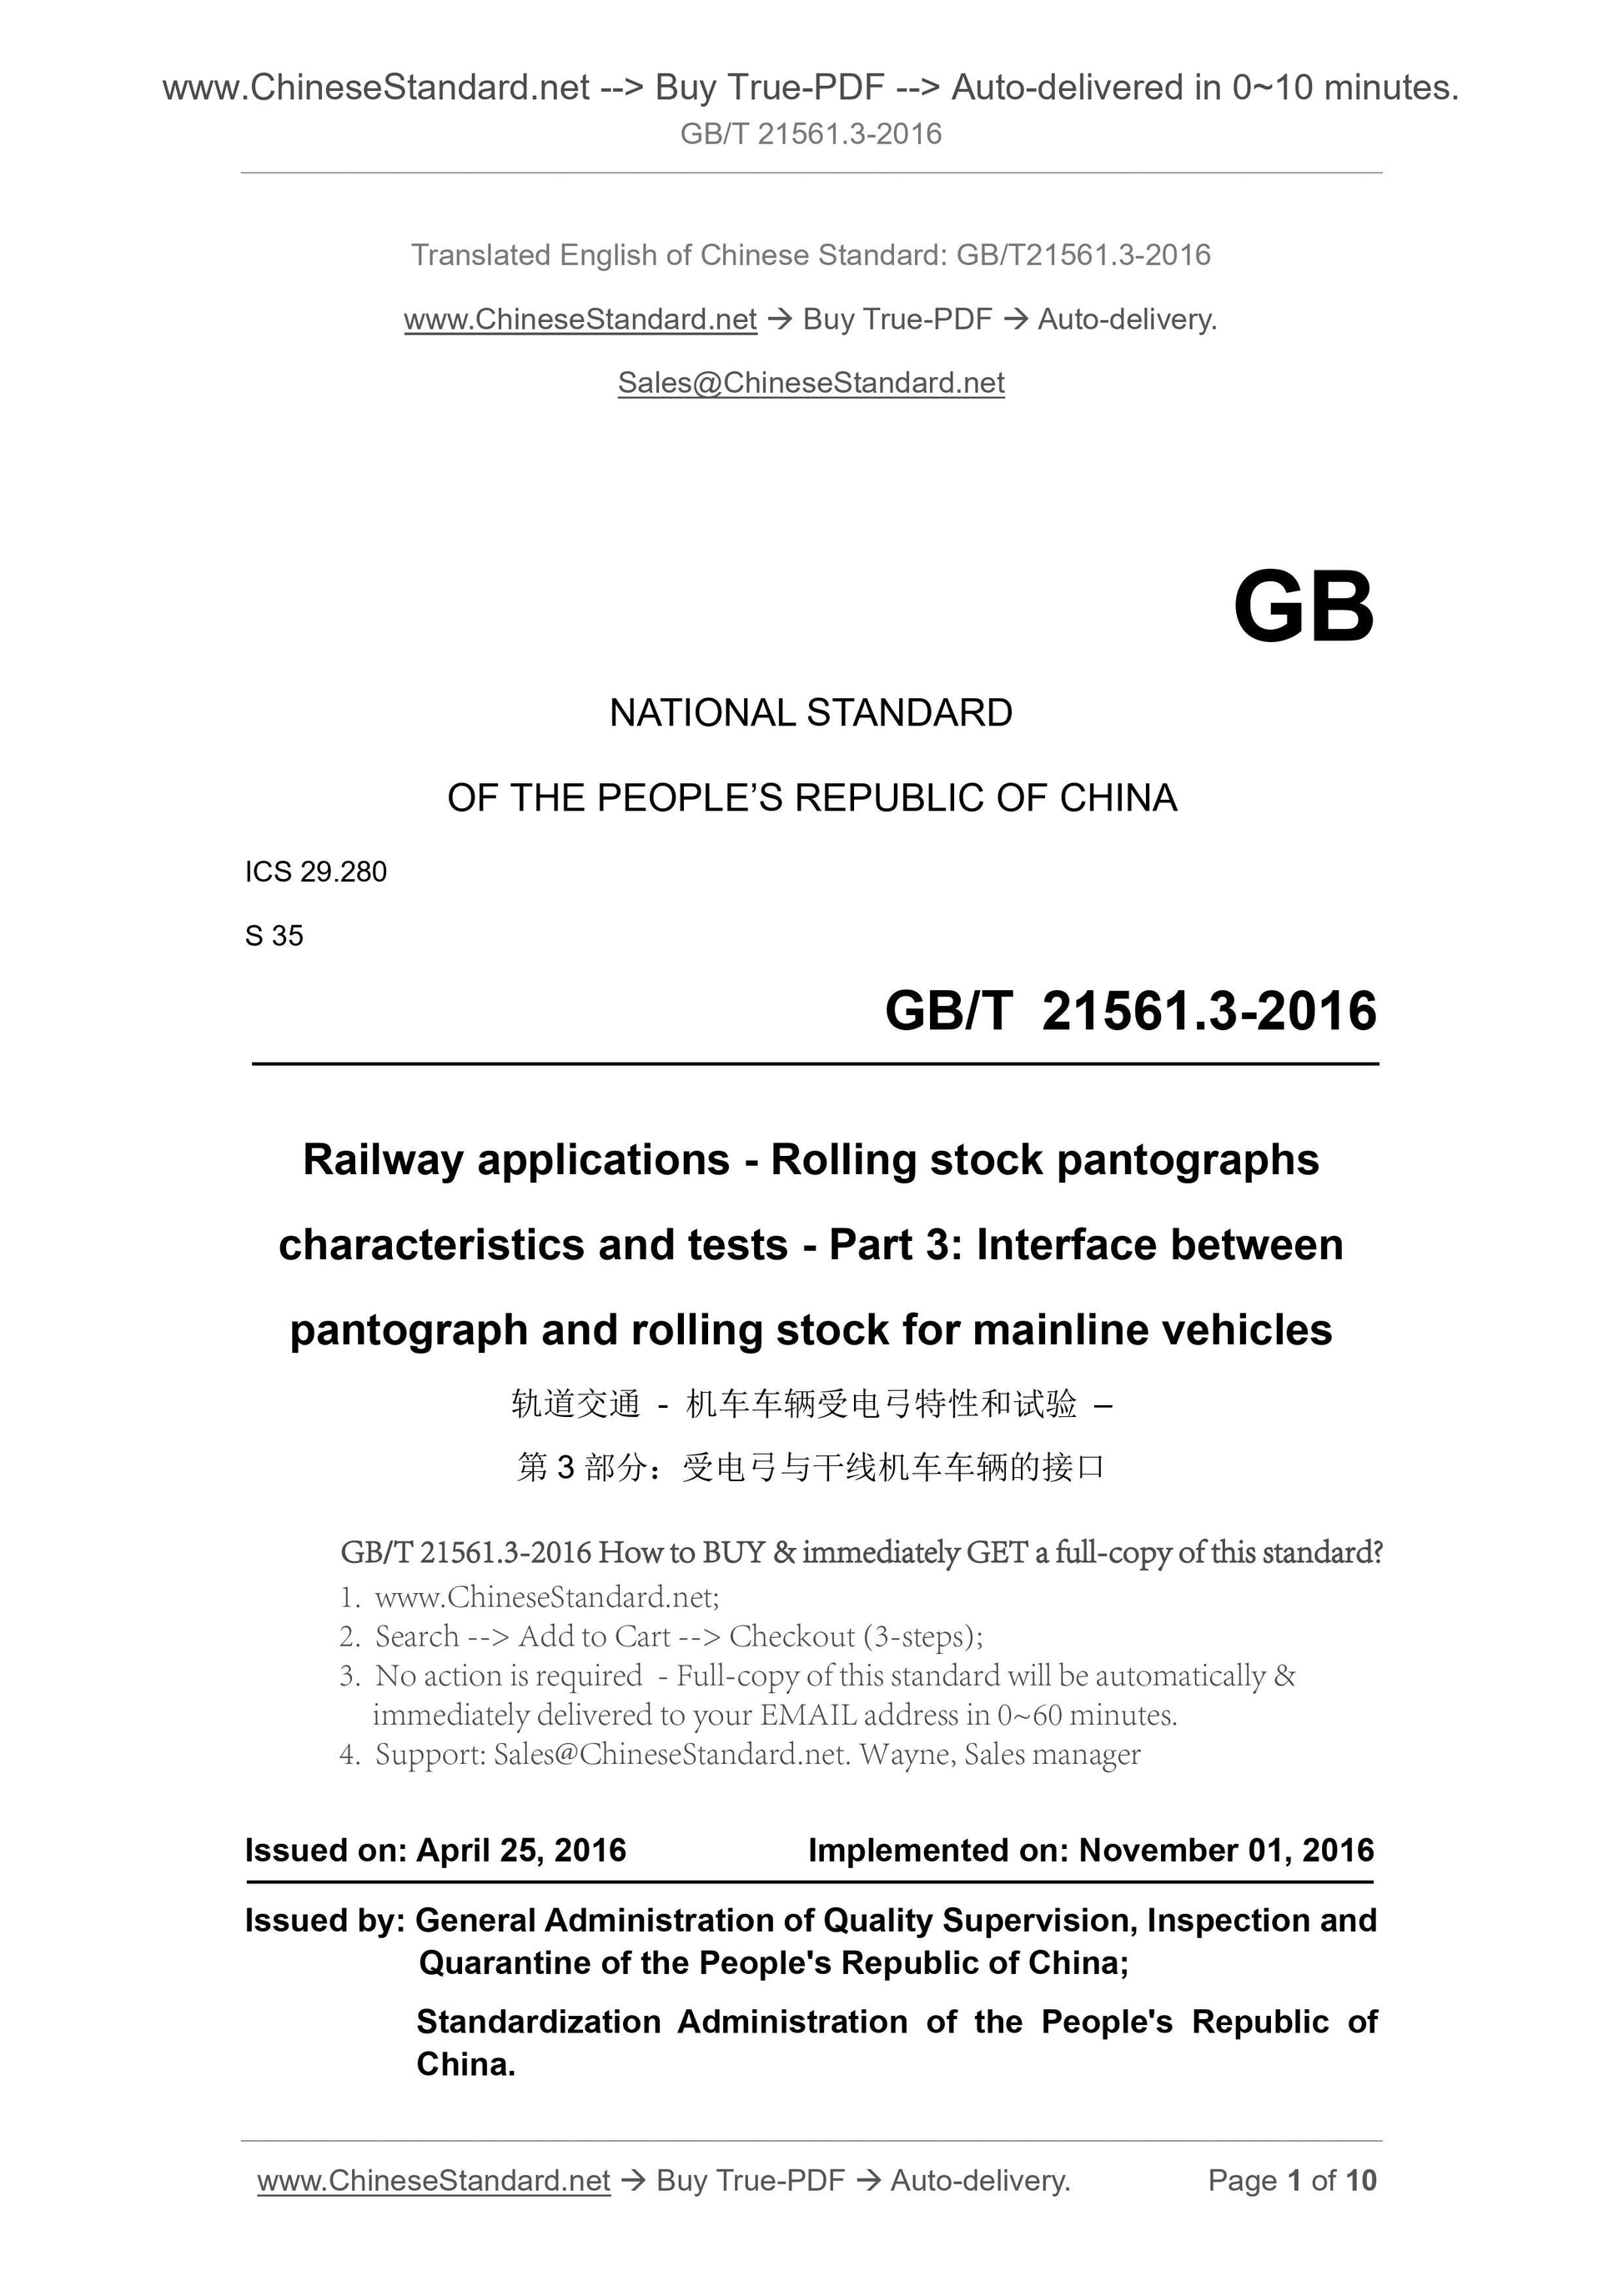 GB/T 21561.3-2016 Page 1